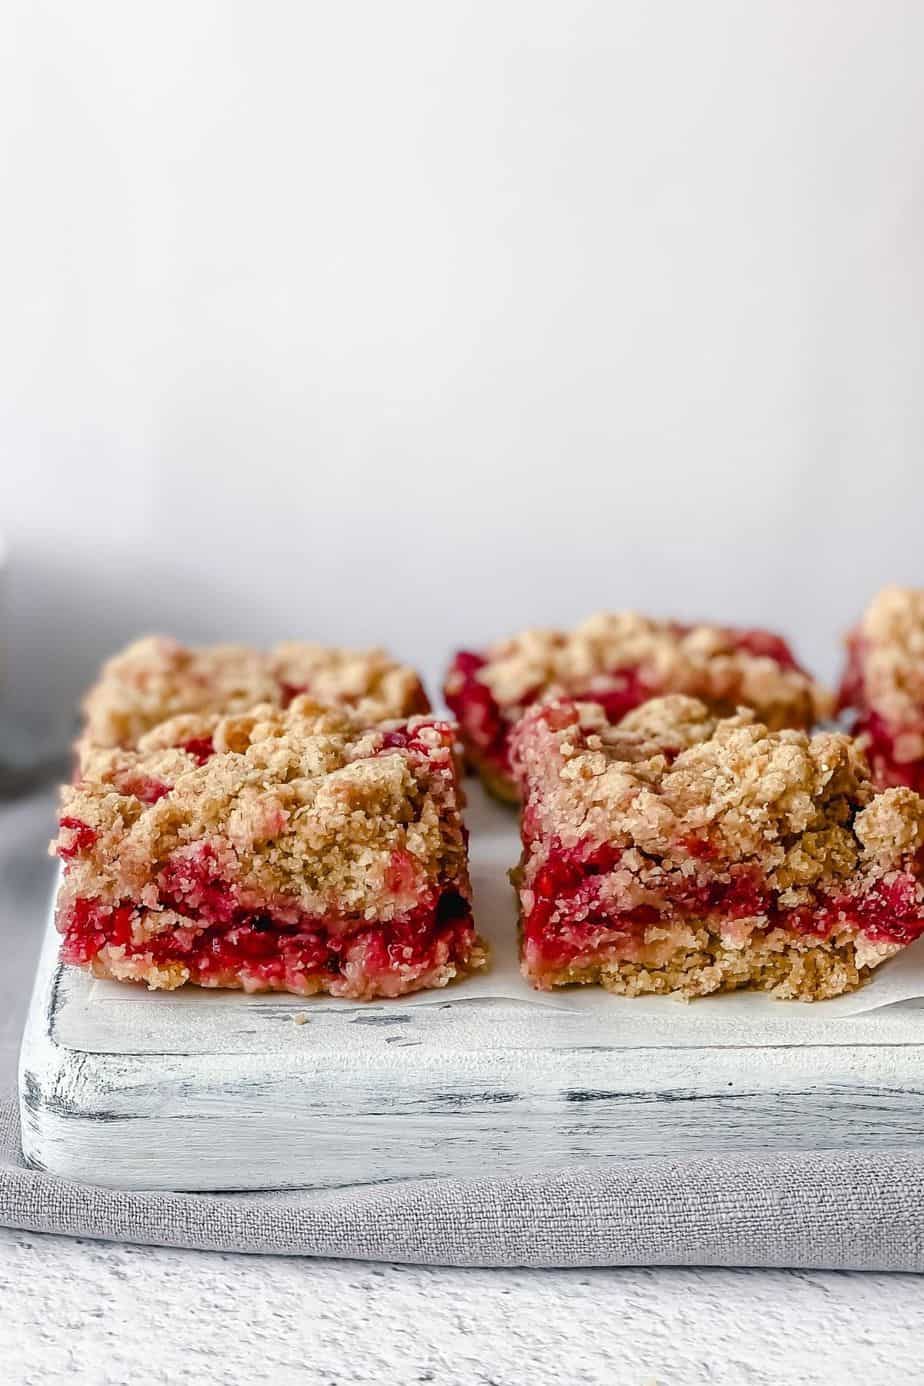 These Red Currant Crumble Bars are gluten free, super easy summer berry recipe that you can whip up in only few minutes. Serve them for dessert, breakfast or enjoy as a delicious snack during the day. - The Yummy Bowl